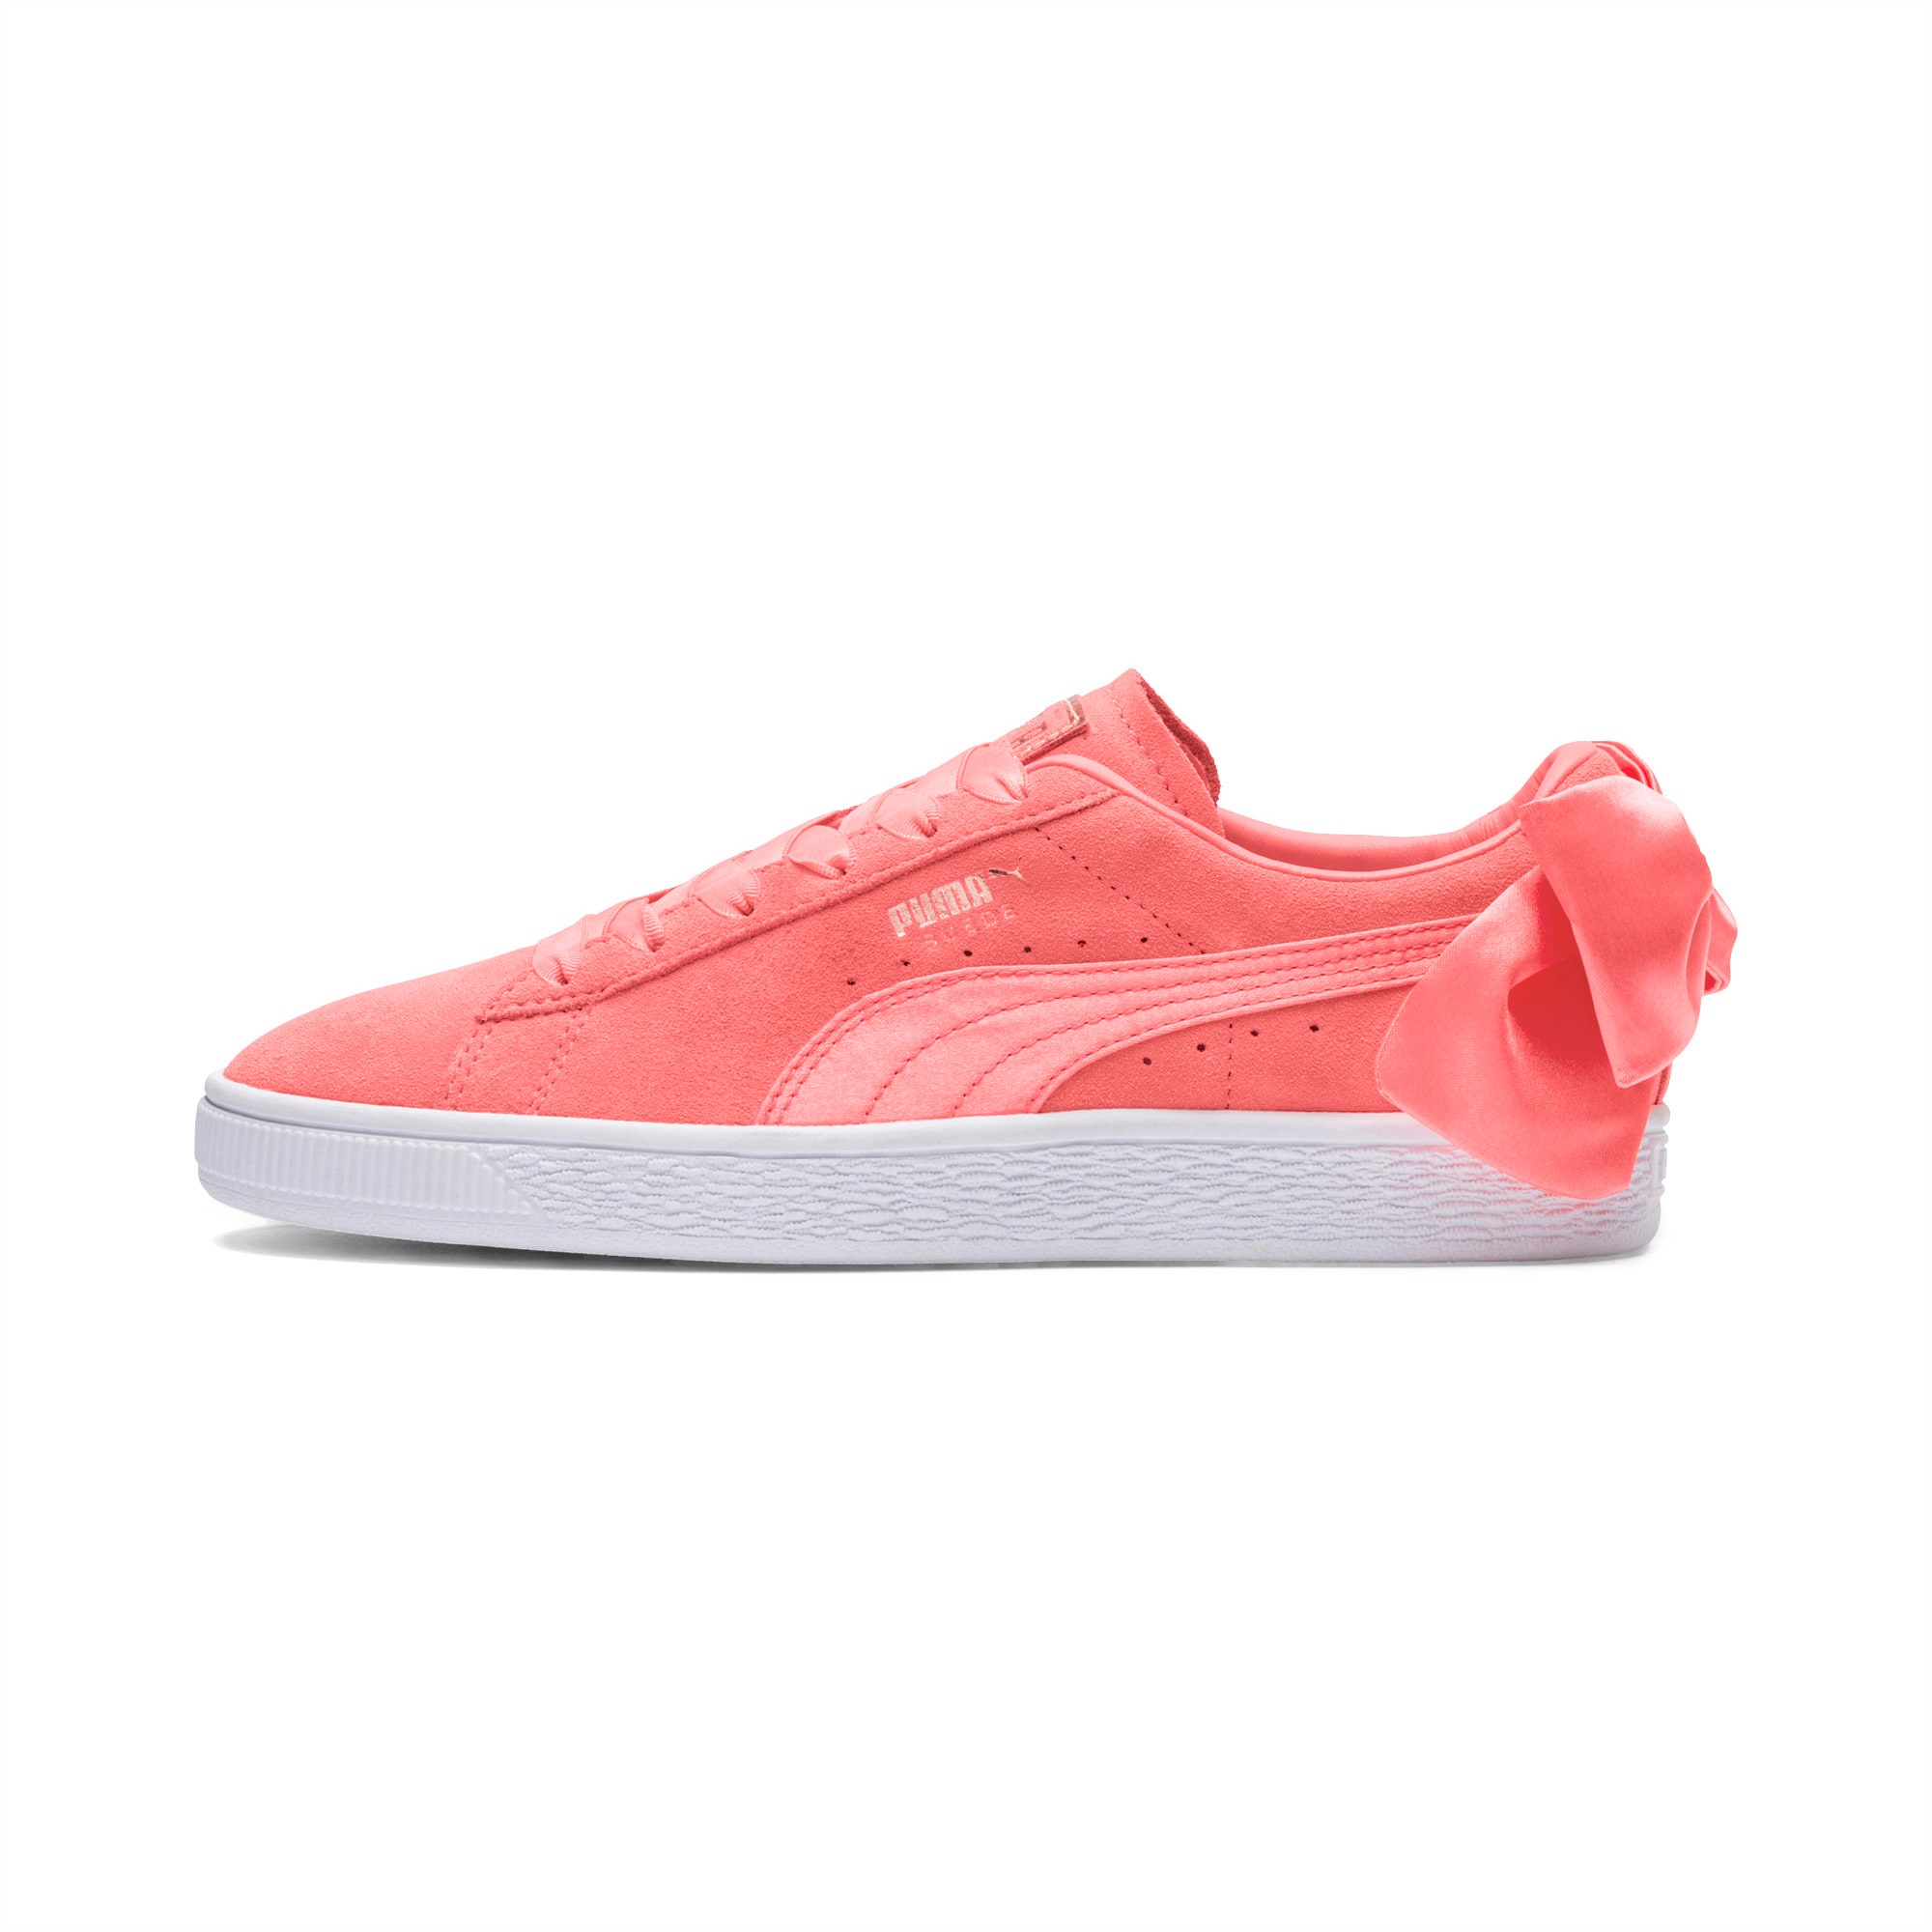 puma suede with bow